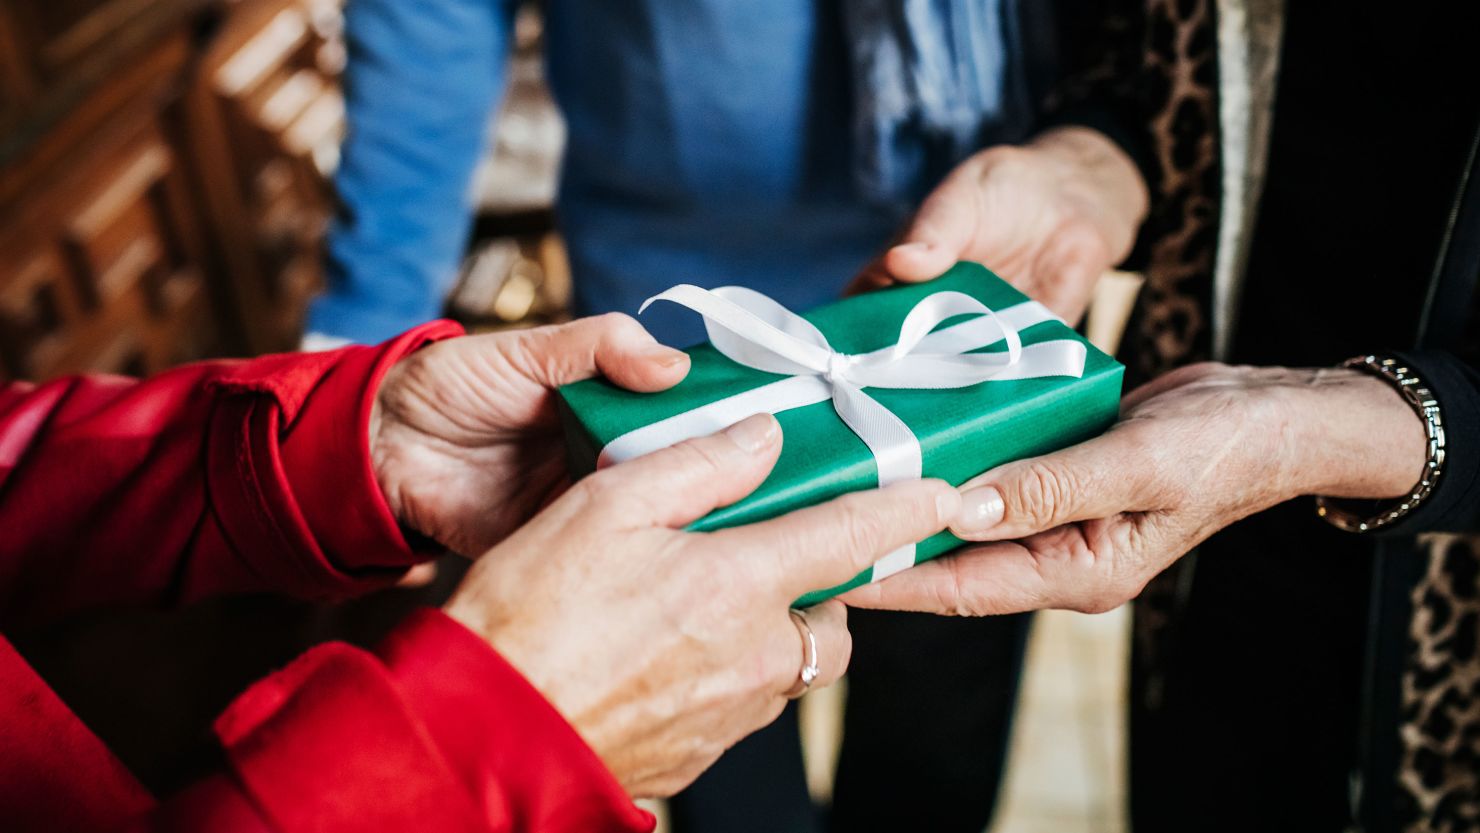 For some people, receiving a gift can be just as stressful — if not more so — than giving one to others.